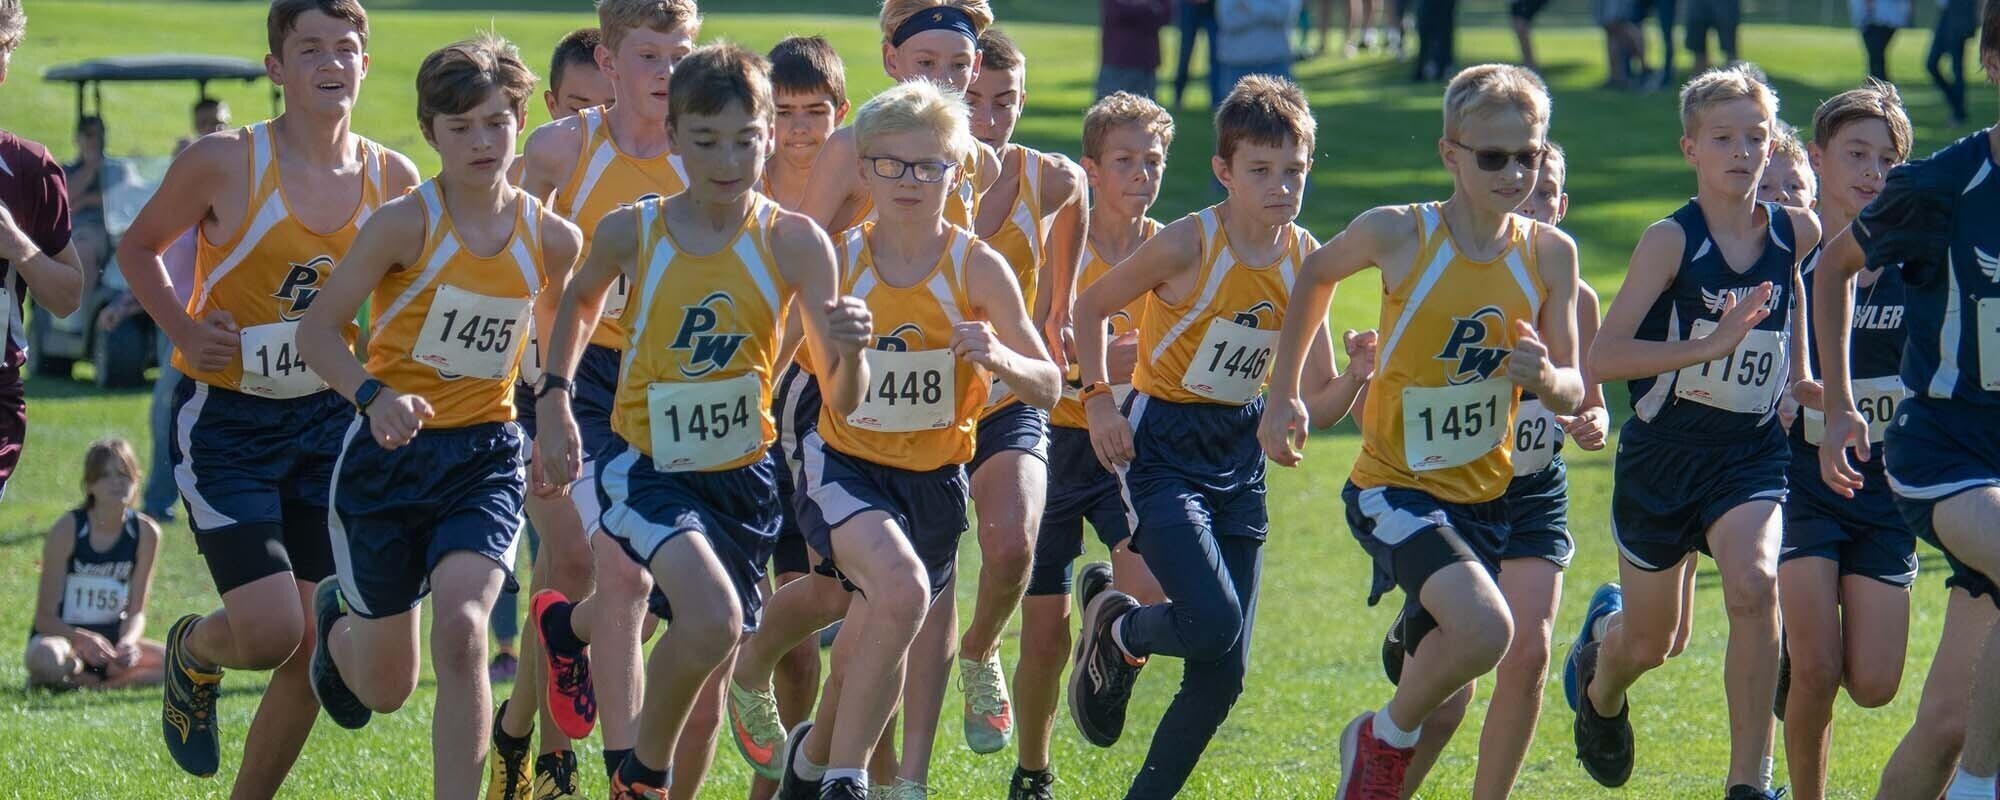 Middle School Cross Country Boys team running